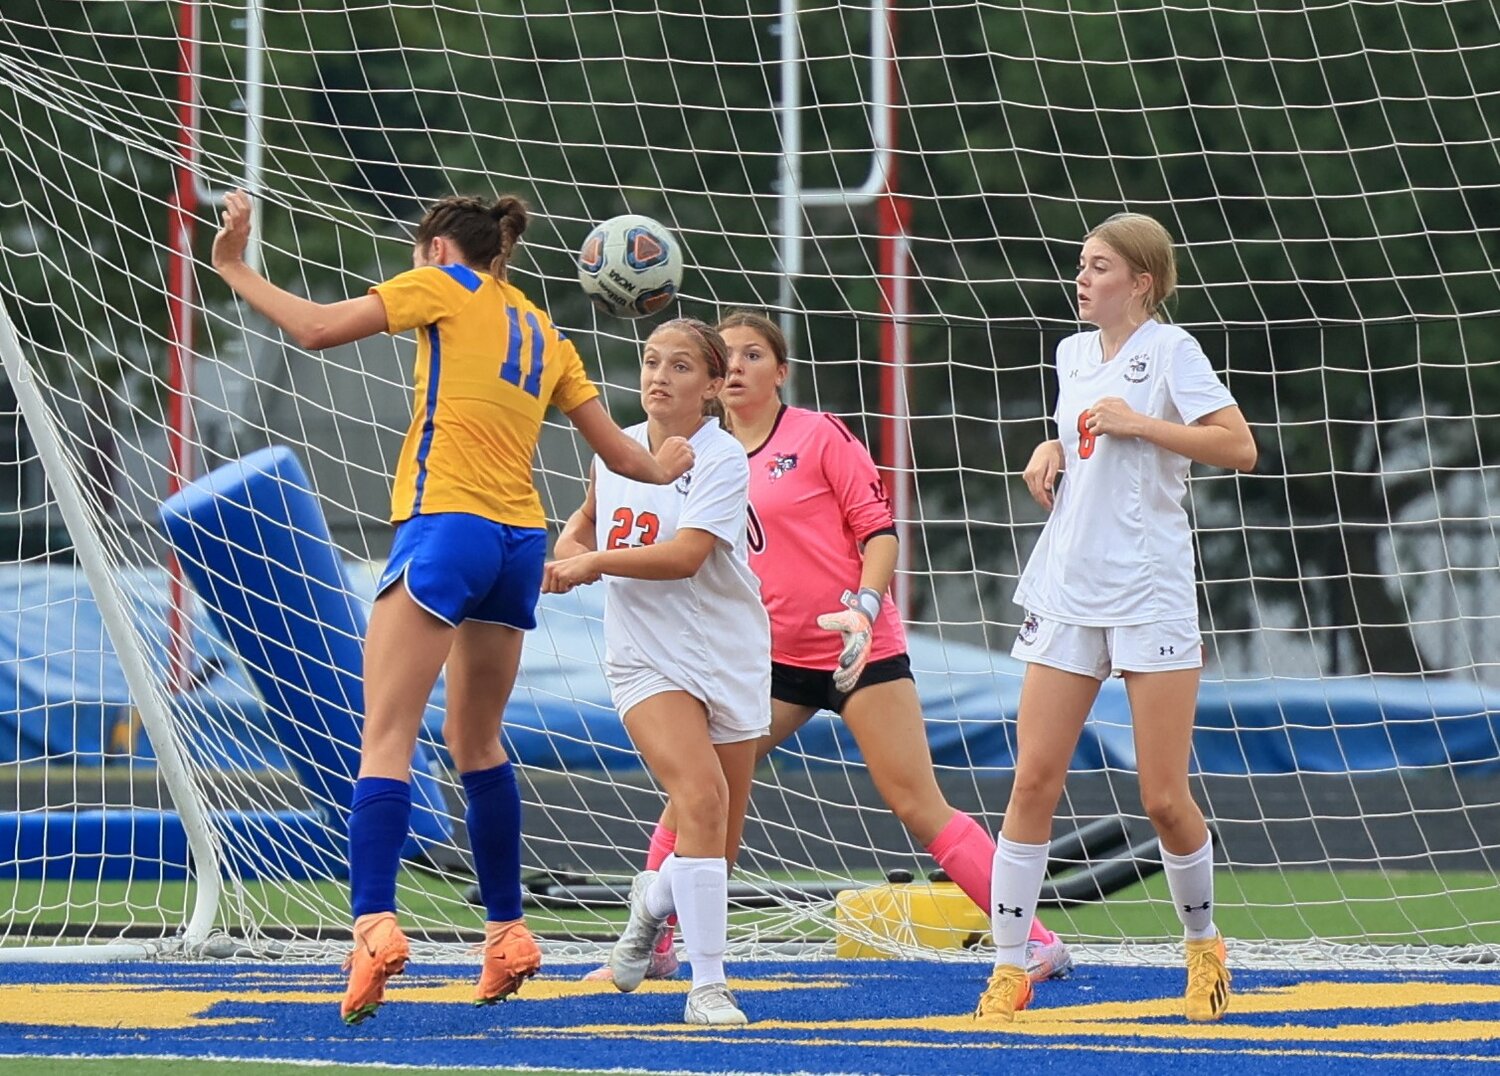 Riley Gardner had this header for one of her three goals on the night.